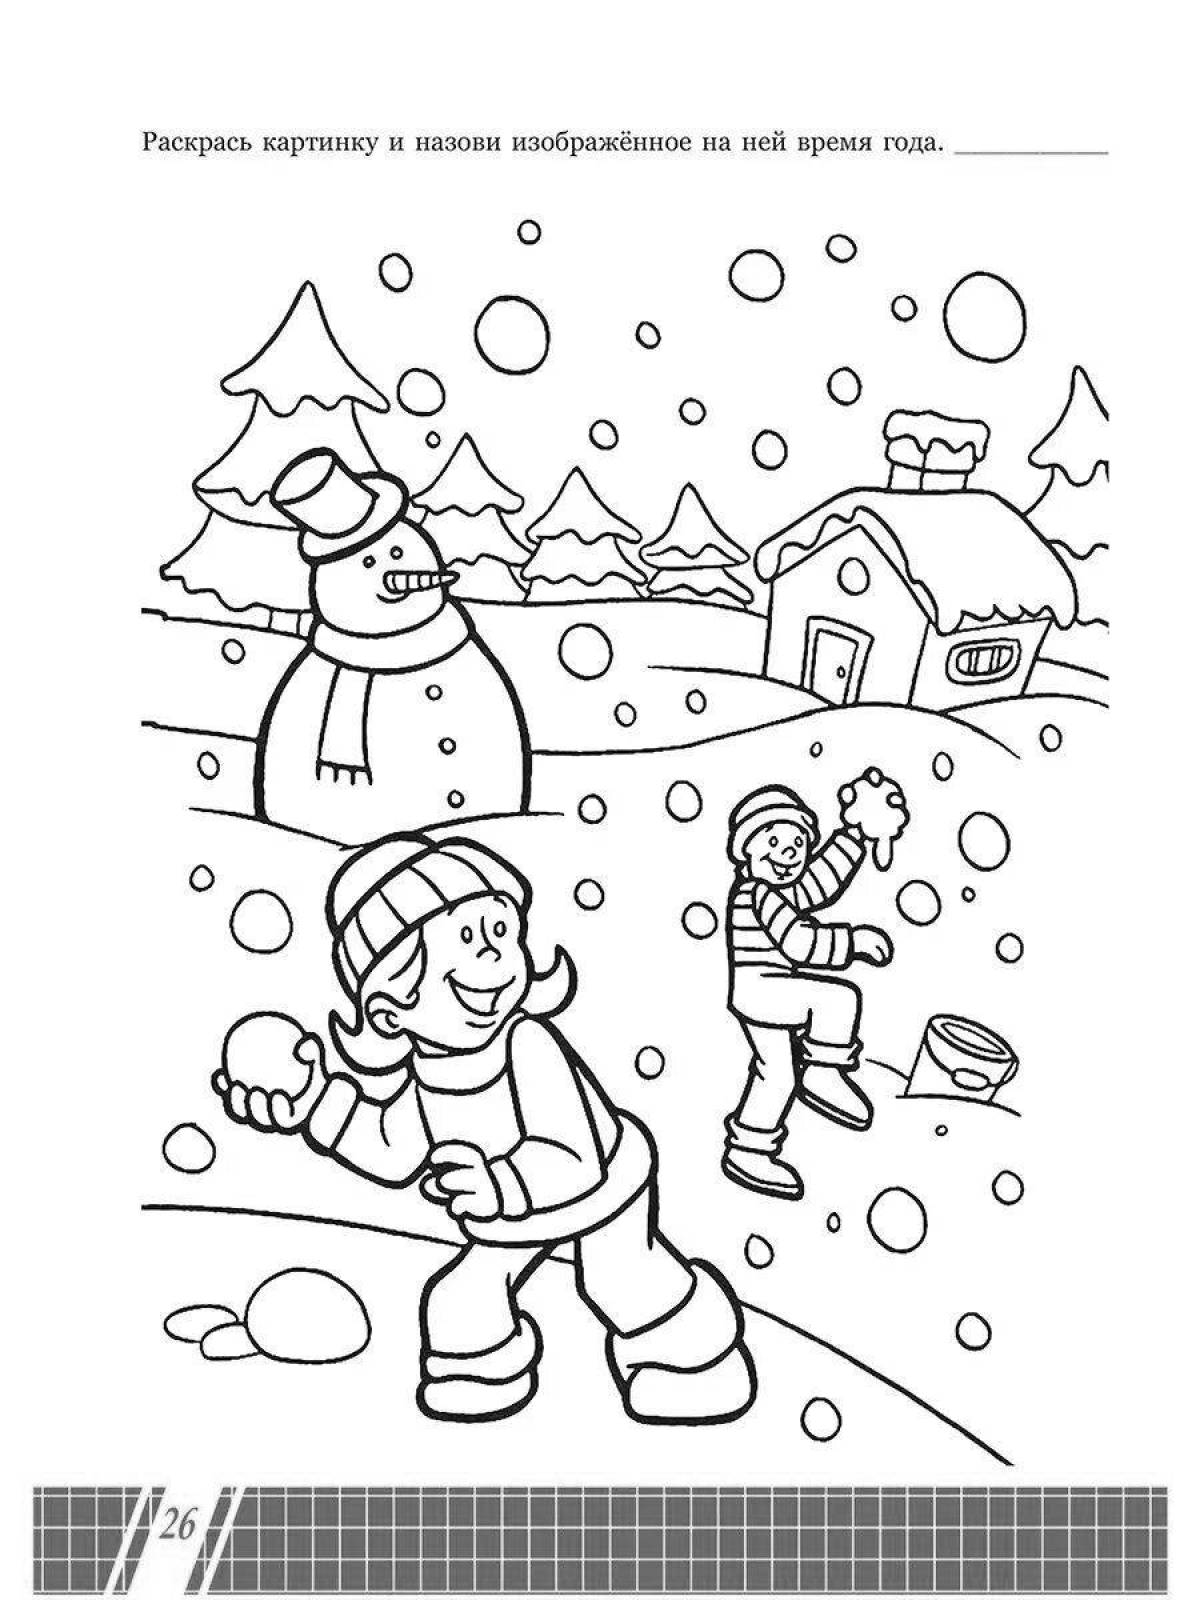 Great winter coloring book for 4-5 year olds